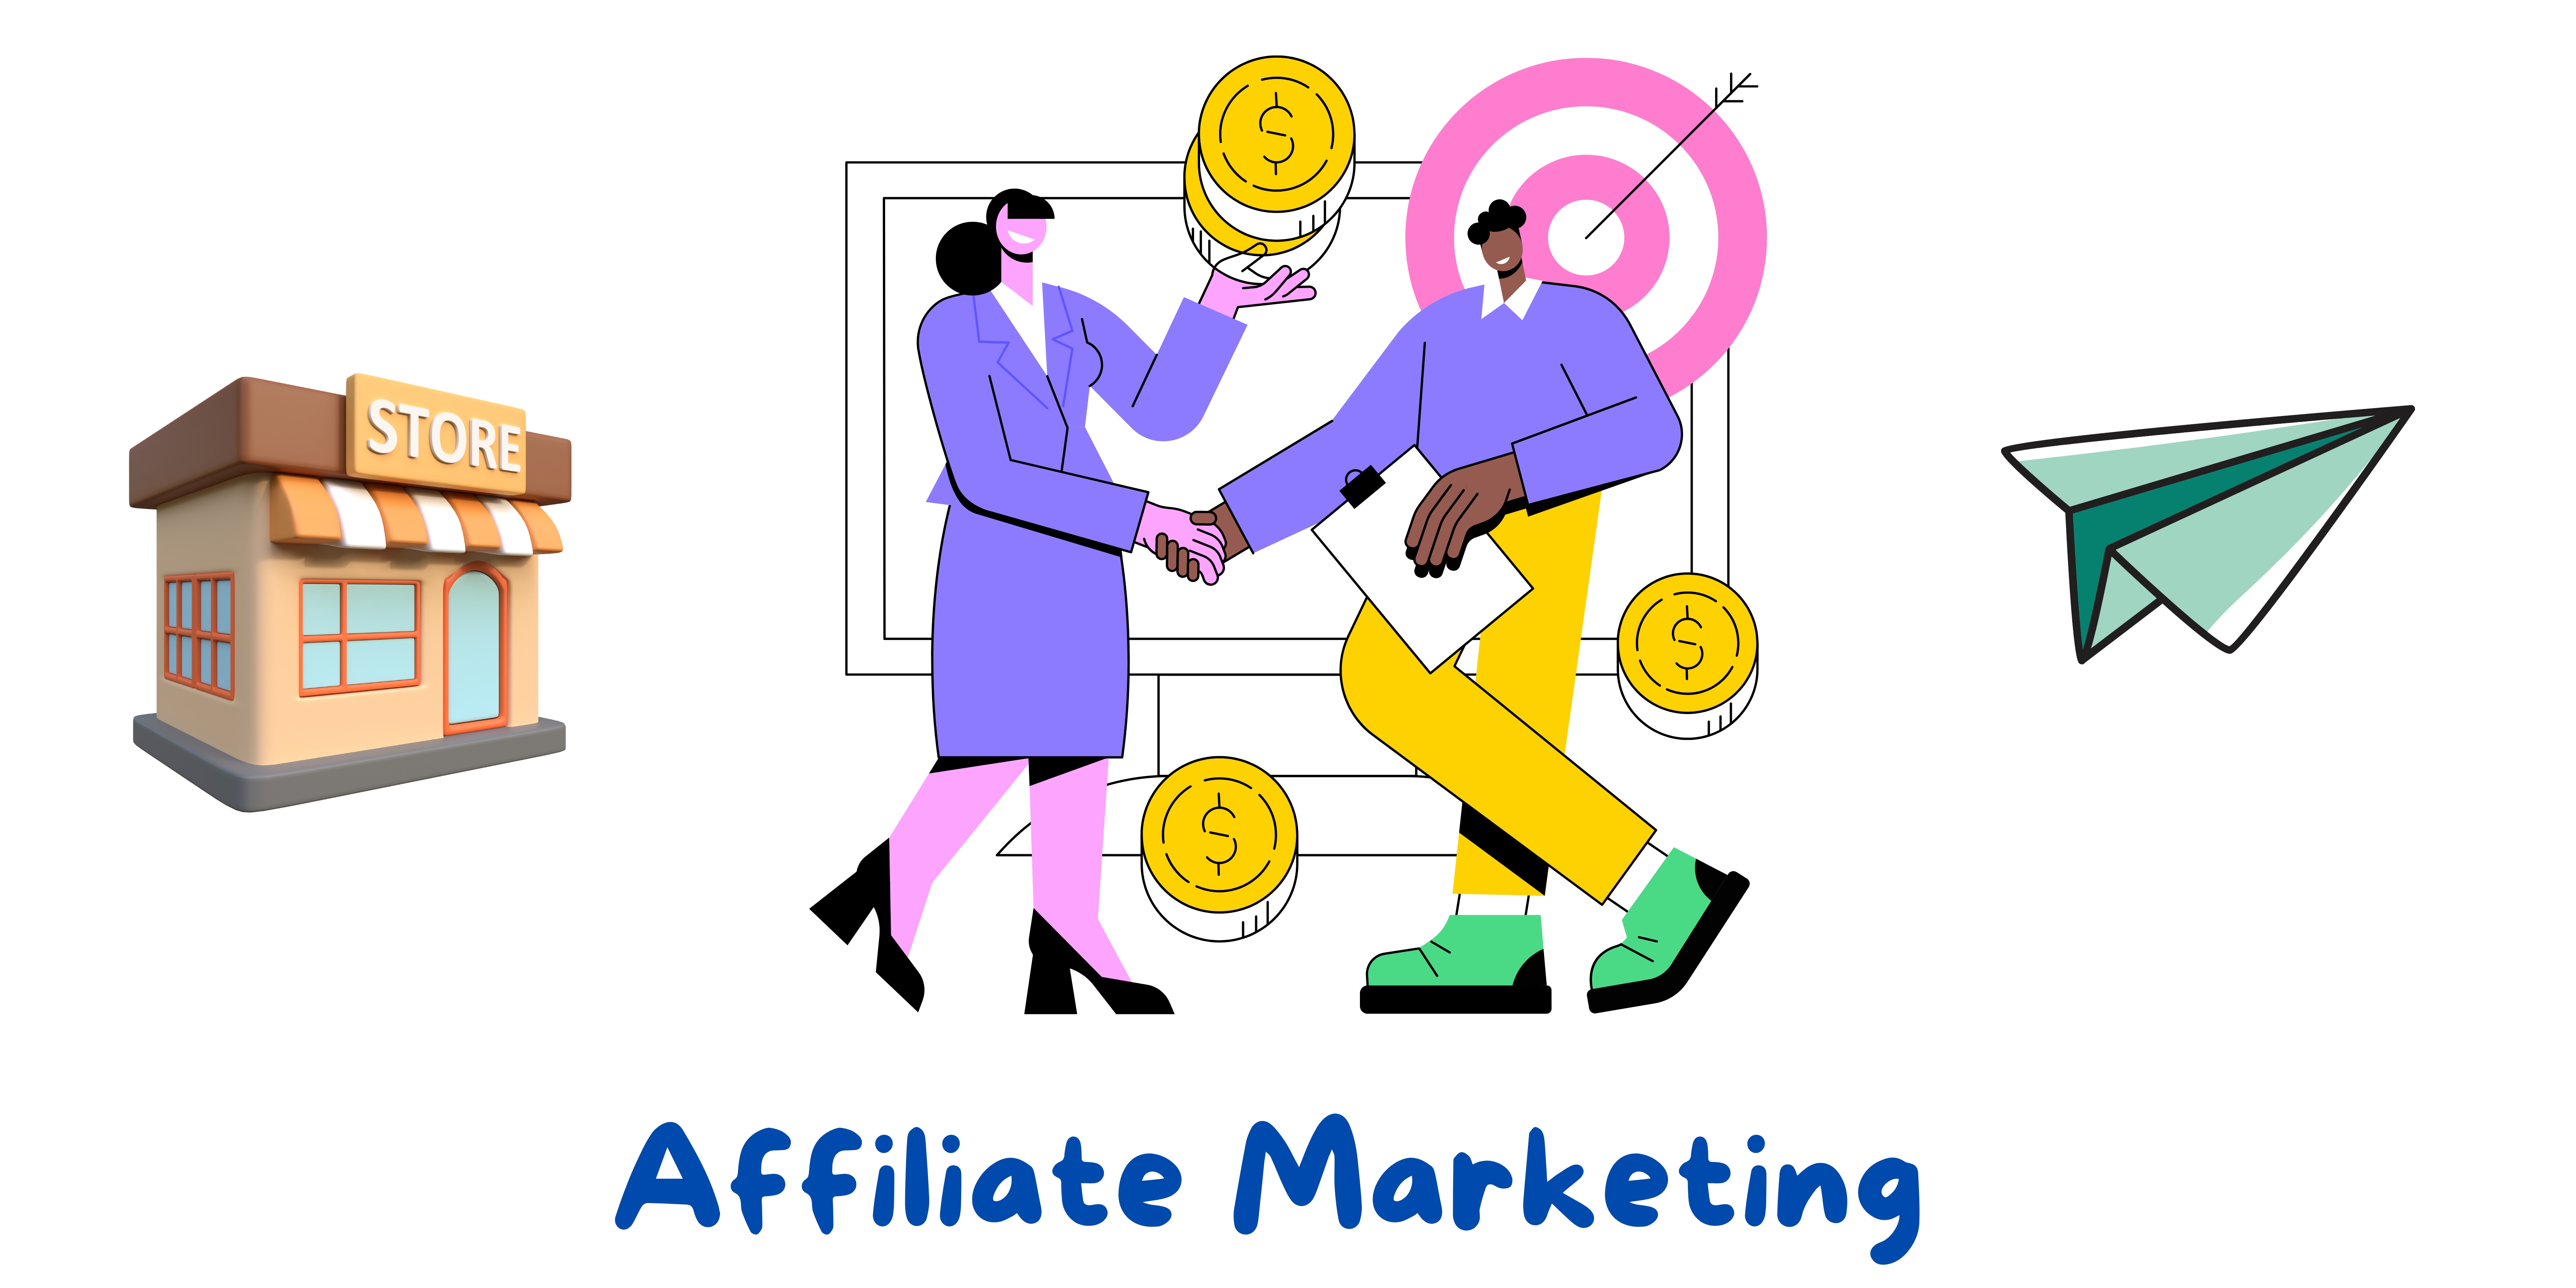 What is affiliate marketing, and how to get started?